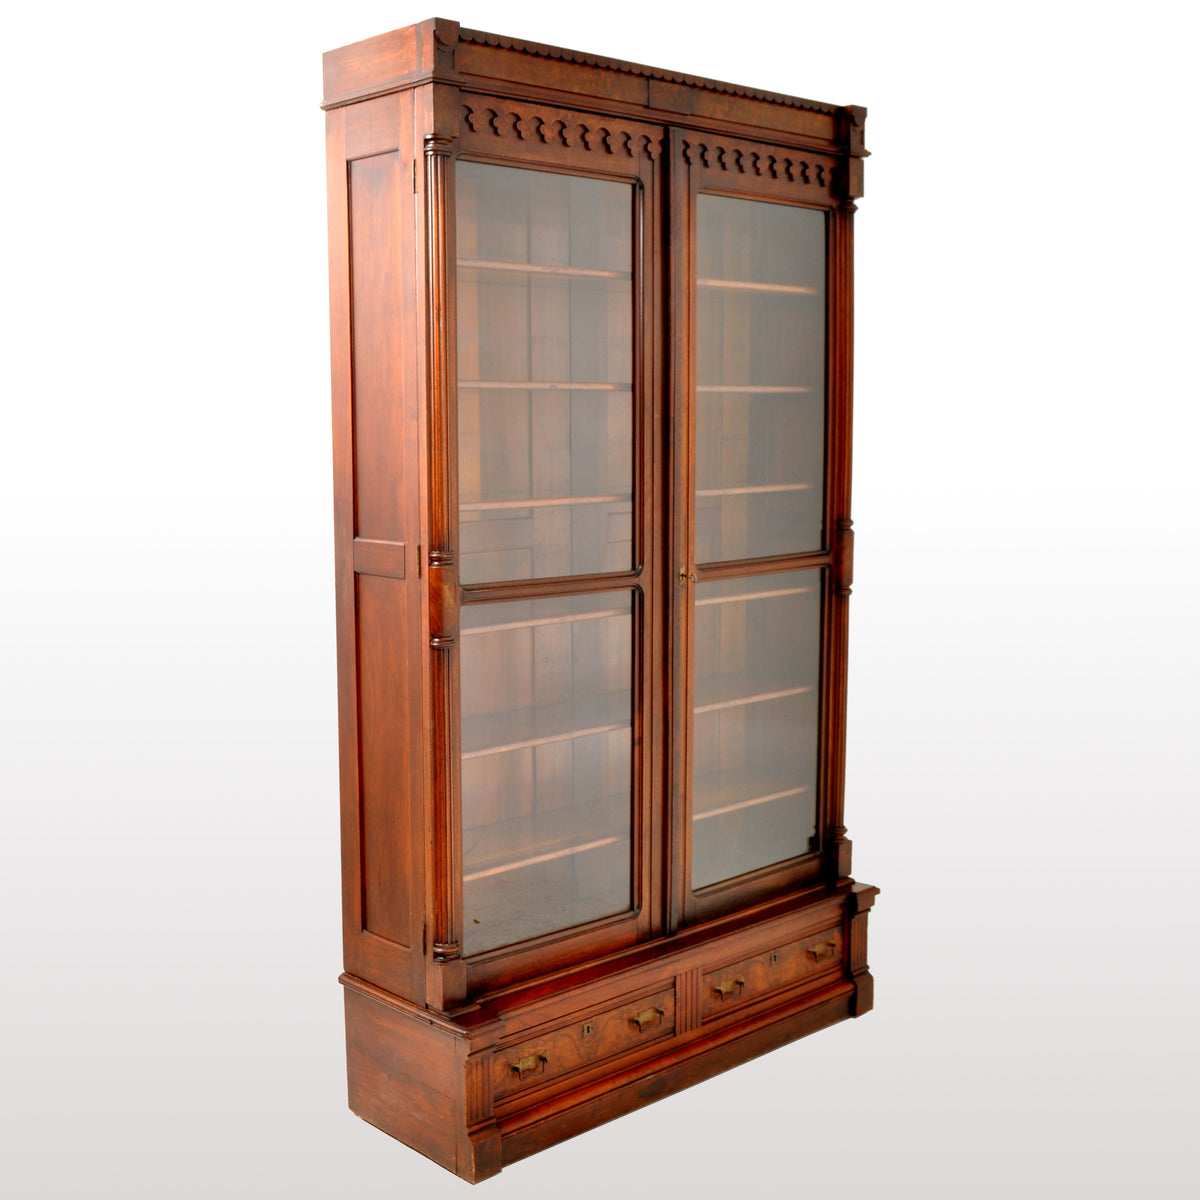 Antique American Renaissance Revival Eastlake Carved Walnut Tall Bookcase, circa 1875